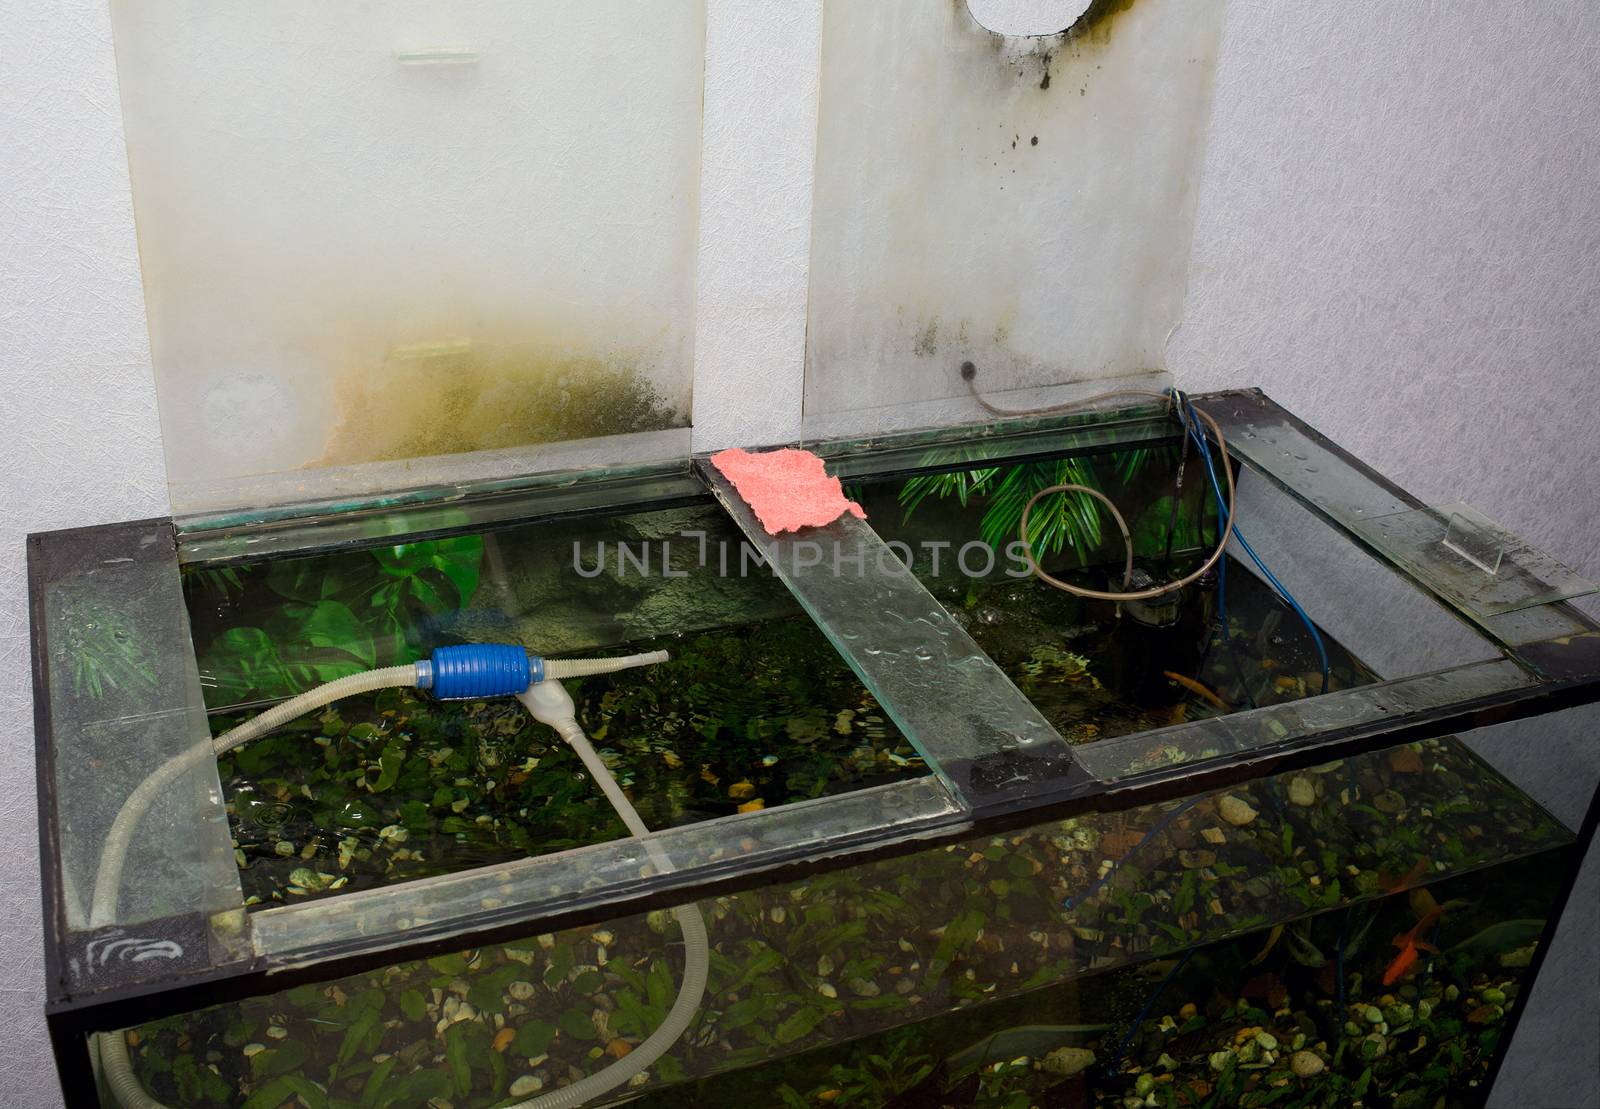 Top view of a rectangular glass aquarium contaminated during the cleaning process